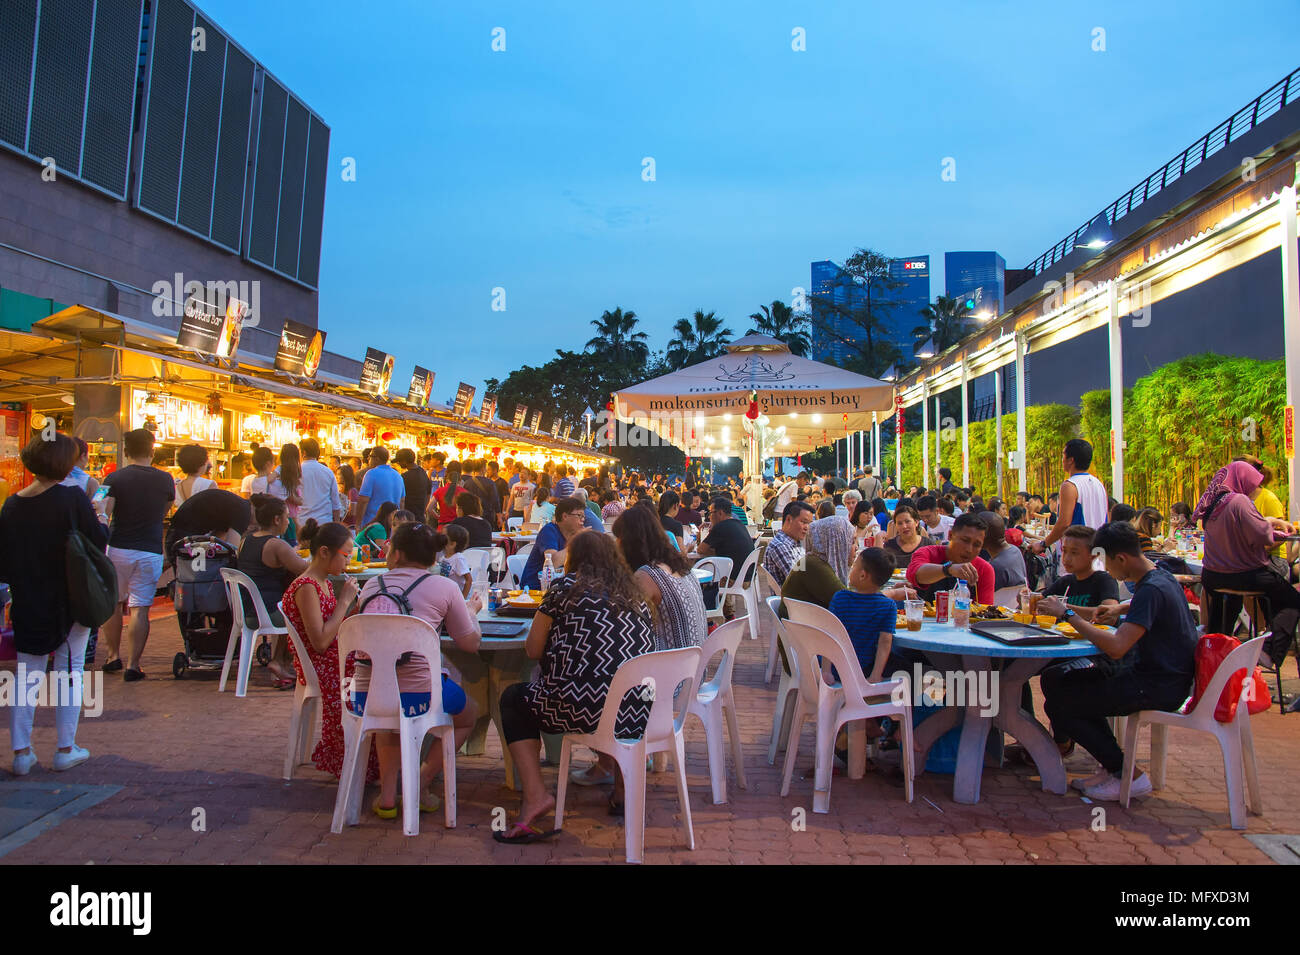 SINGAPORE - JAN 14, 2017 : People at popular food court in Singapore. Inexpensive food courts are numerous in the city so most Singaporeans dine out a Stock Photo